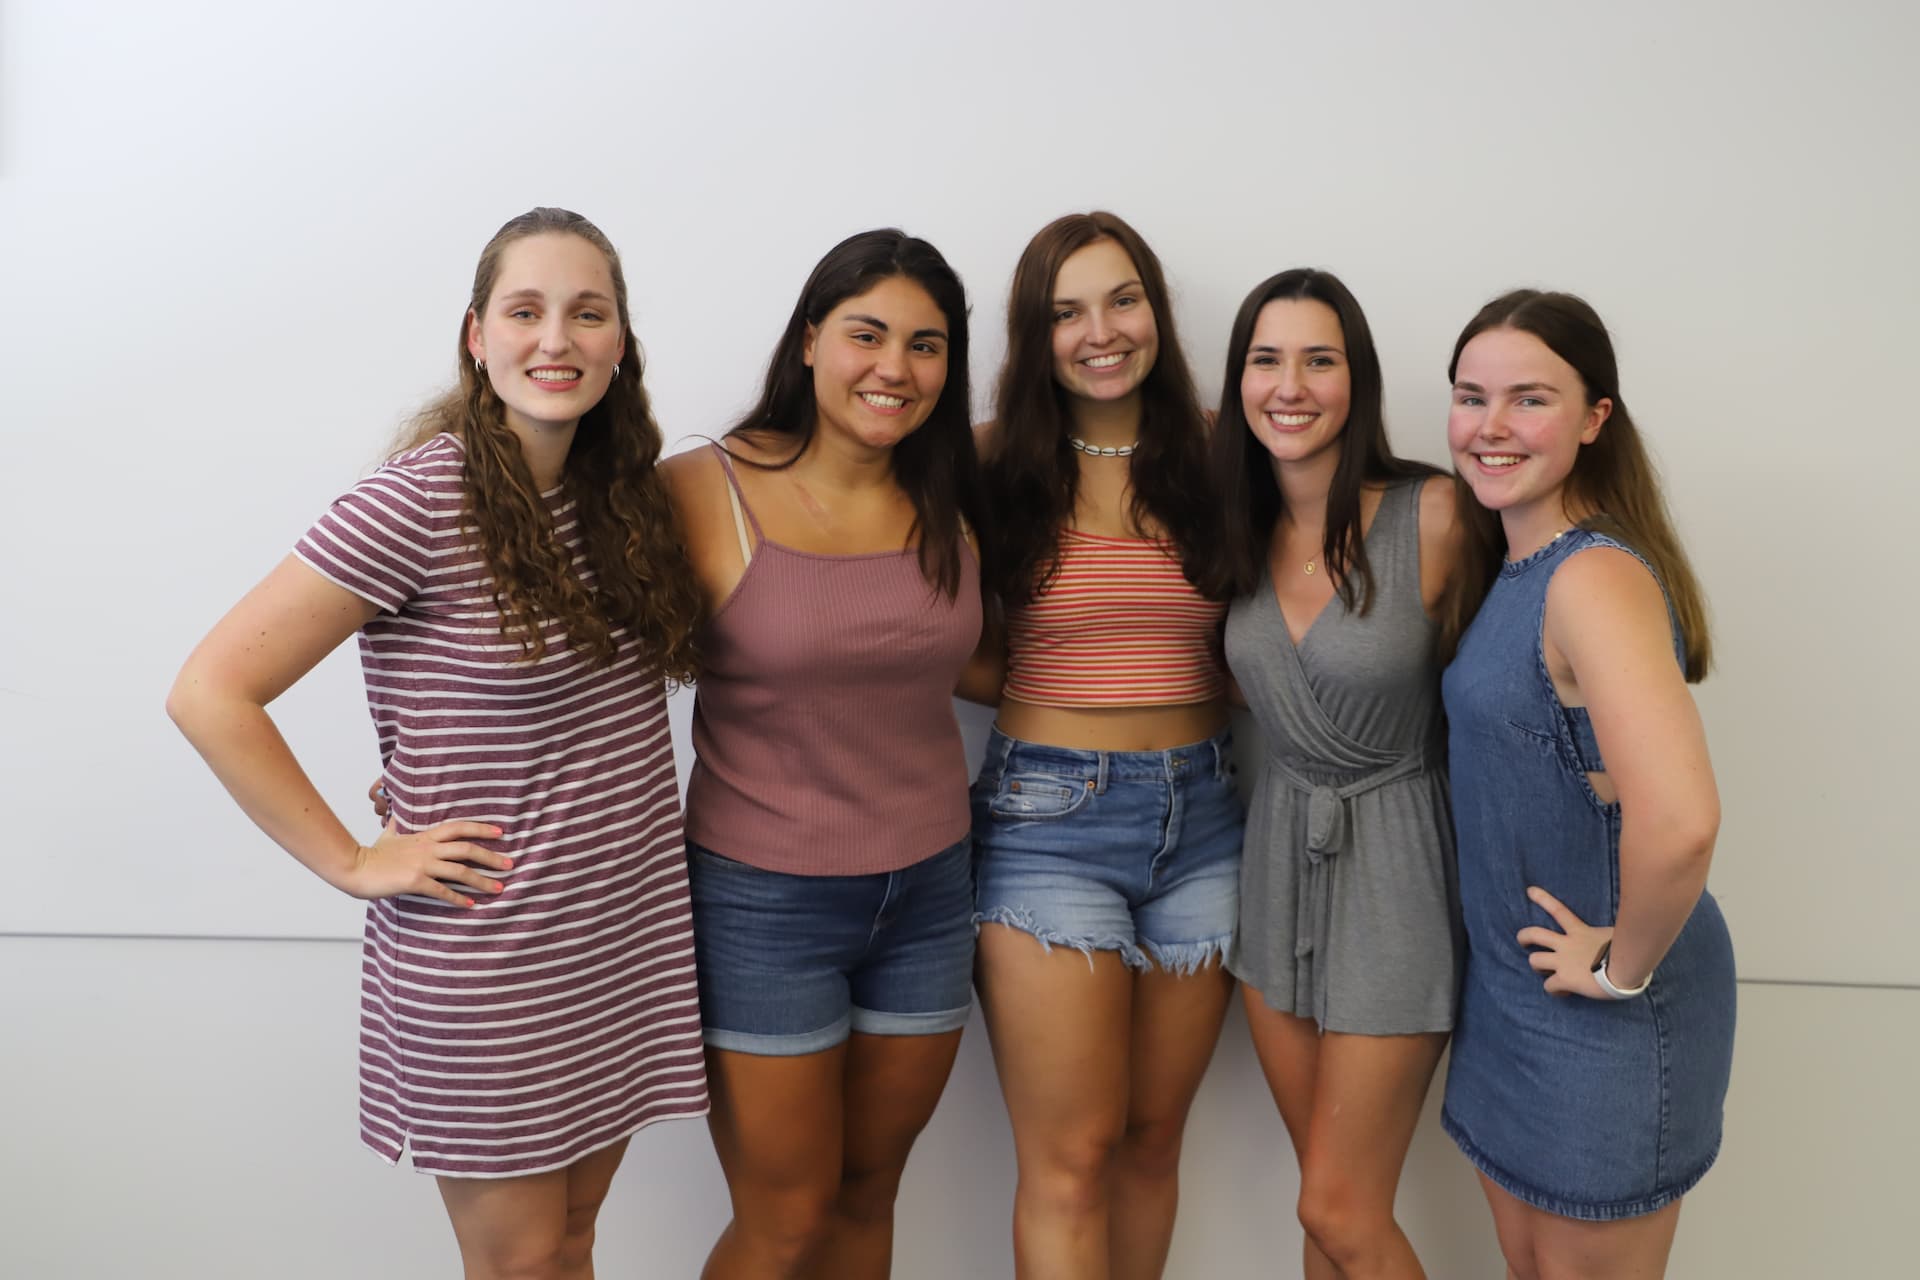 Autumn Arel (left) with her fellow peers from Fairfield University who all participated in the study abroad program at JCU